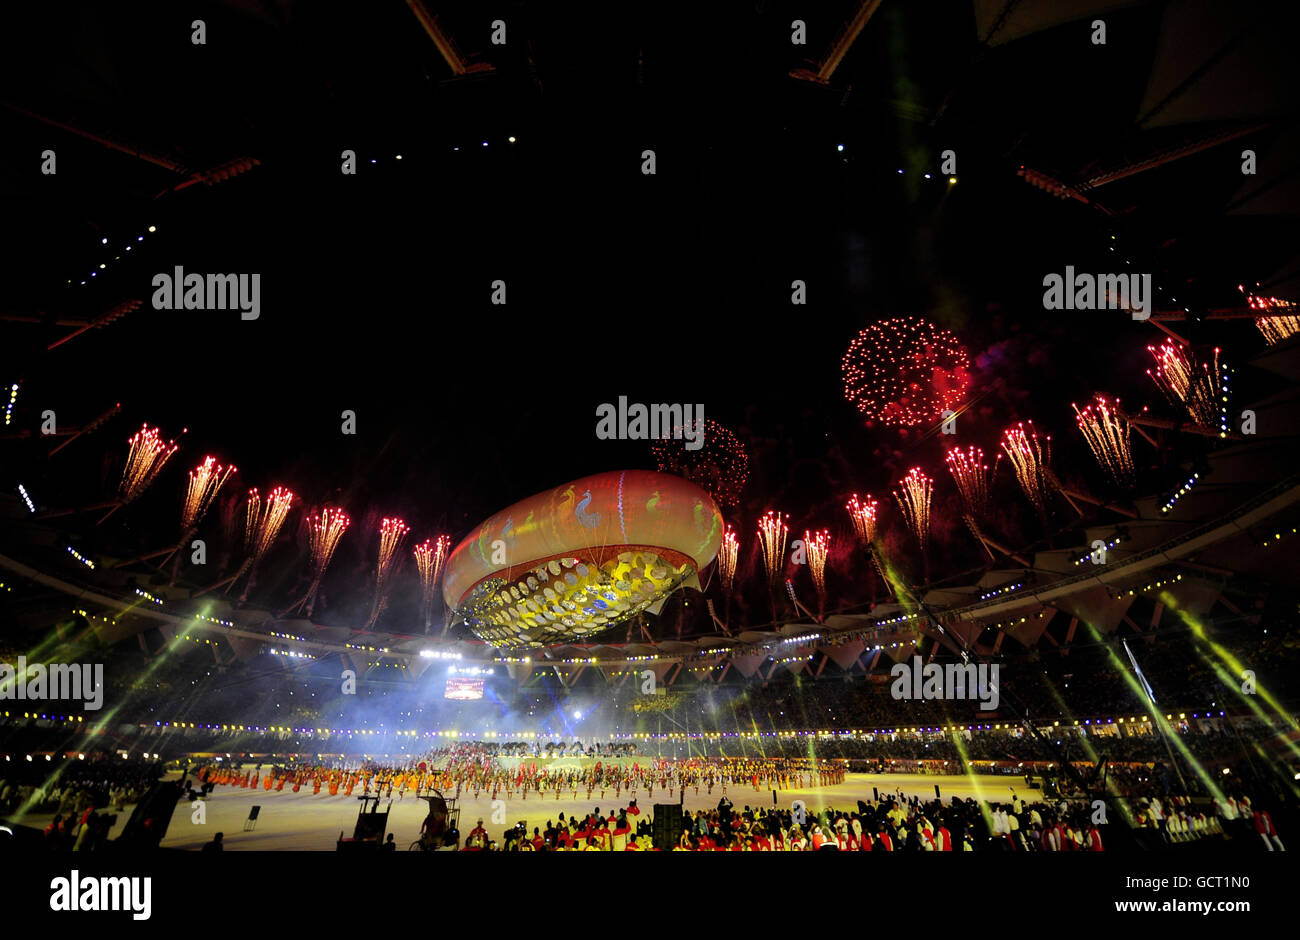 Fireworks light up the stadium at the end of the 2010 Commonwealth Games opening ceremony at the Jawaharlal Nehru Stadium in New Delhi, India. Stock Photo